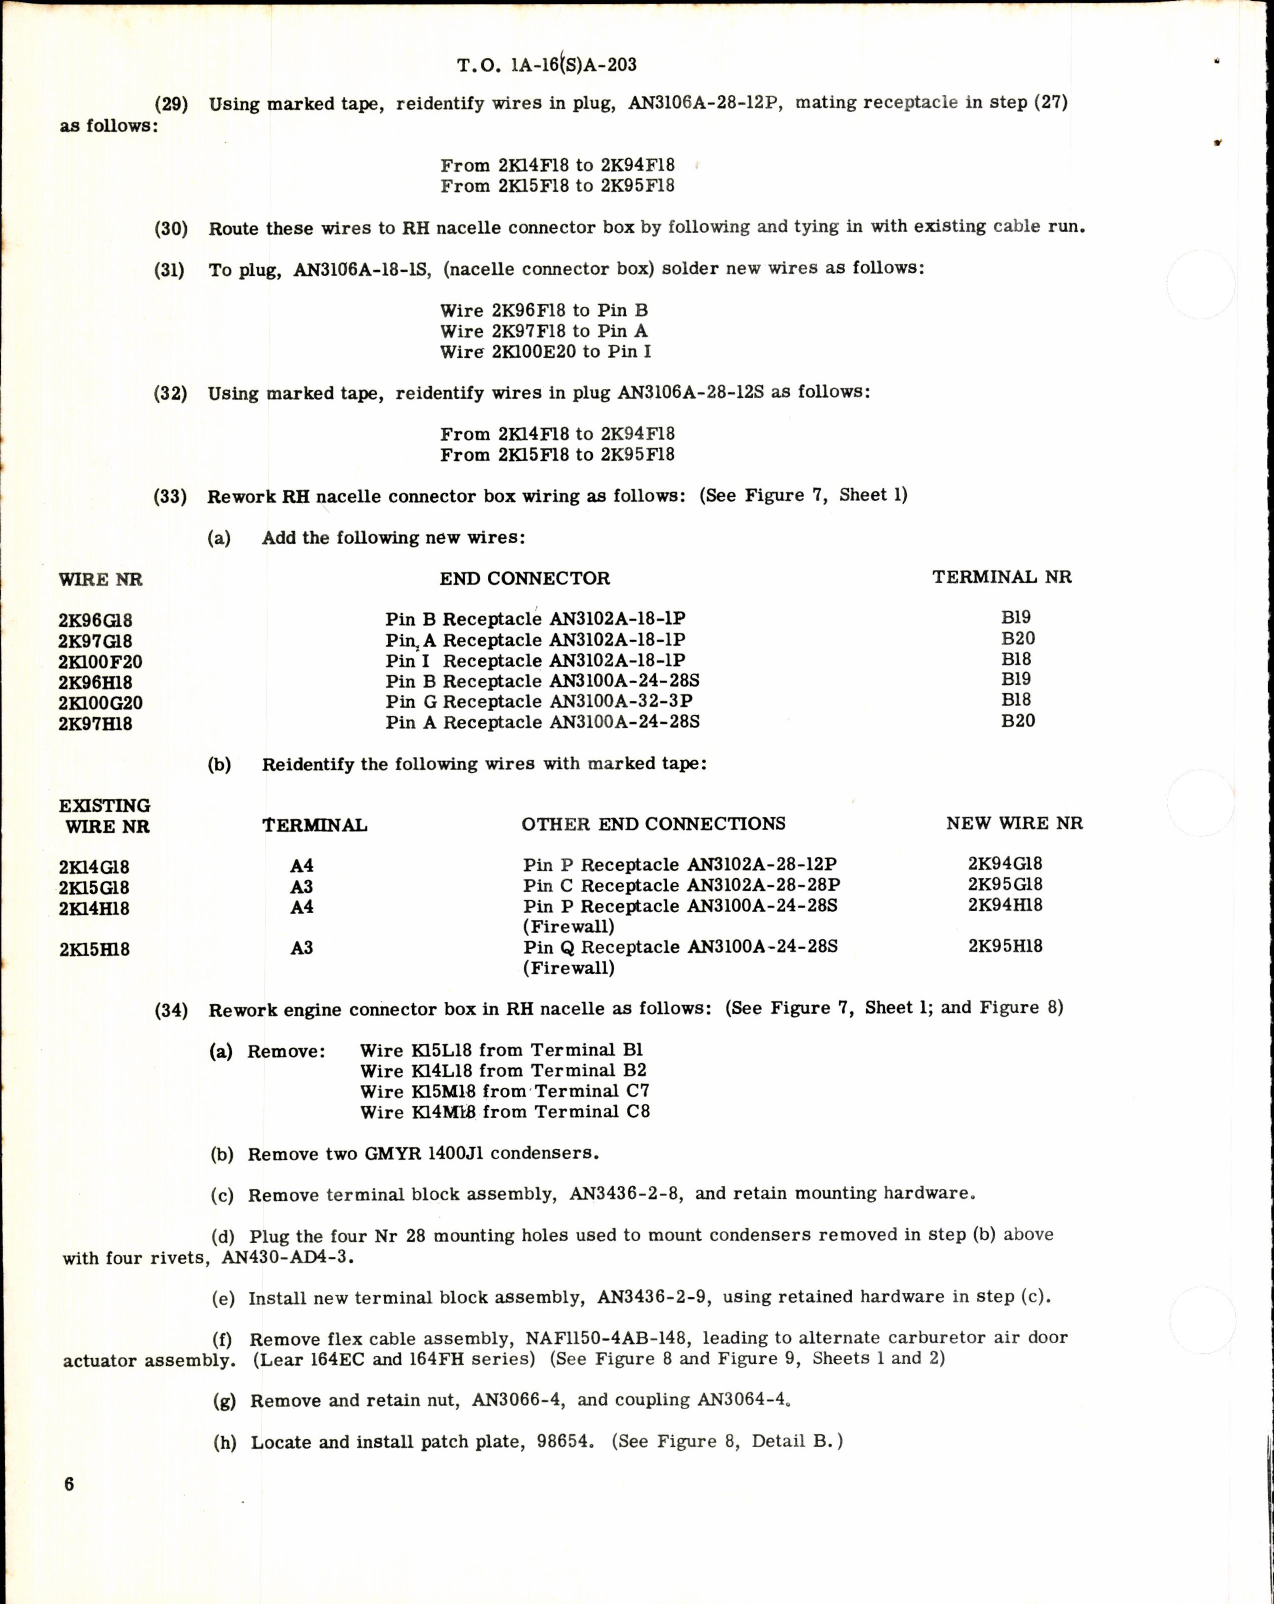 Sample page 6 from AirCorps Library document: Modification of Power Plant Carburetor Air Induction System for SA-16A Aircraft